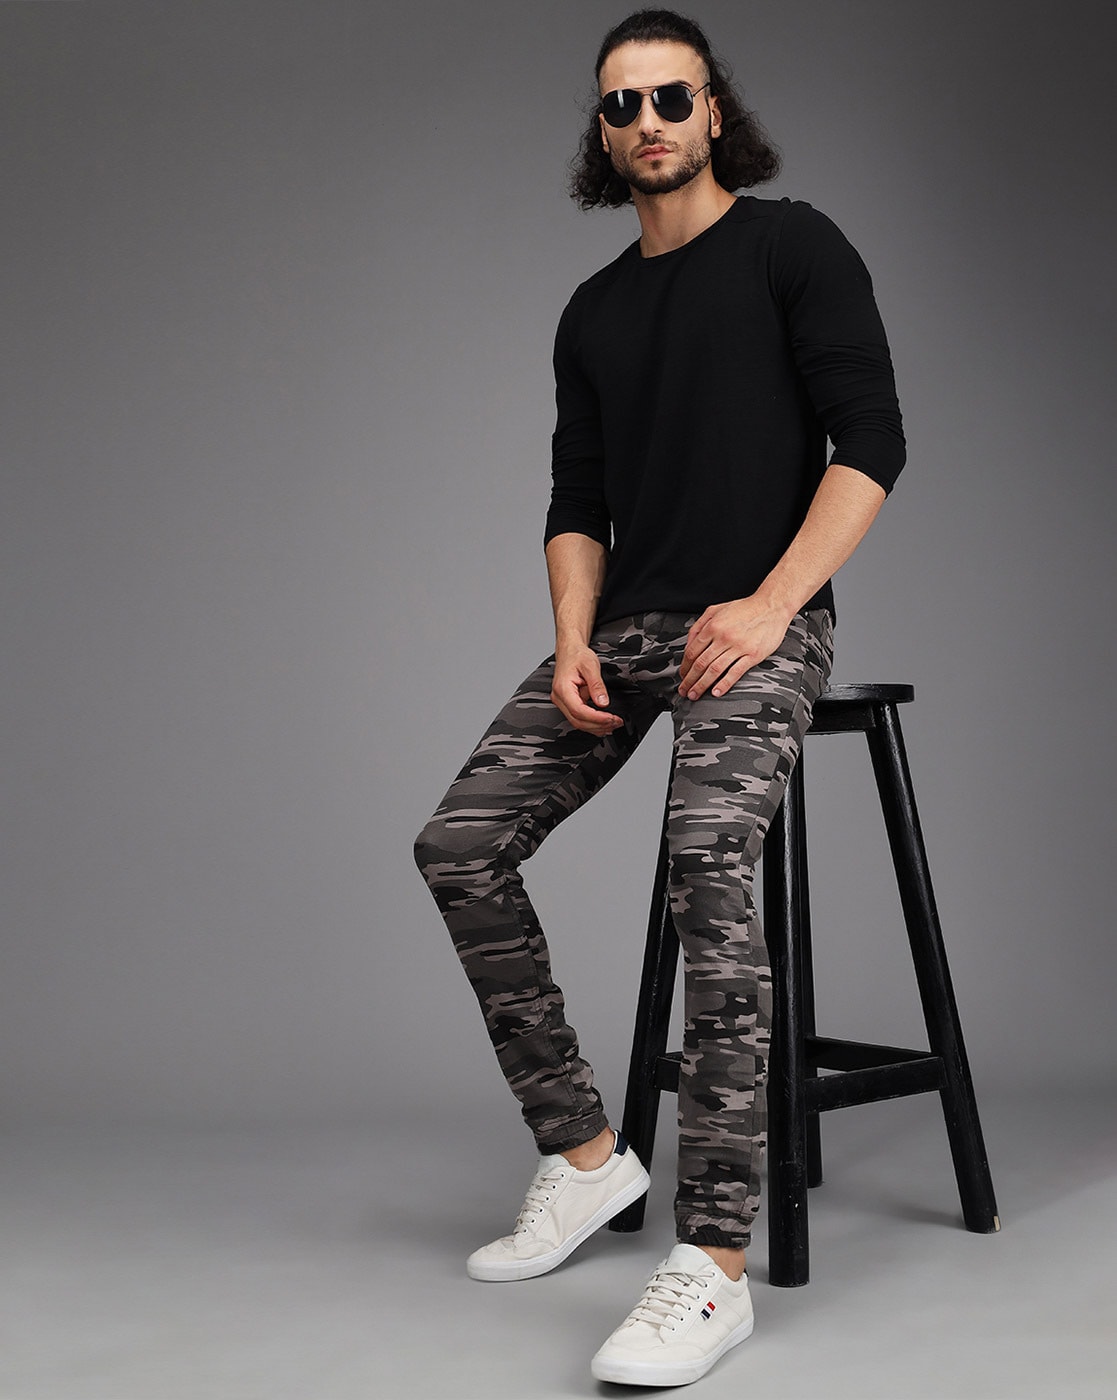 Buy Grey Trousers  Pants for Men by MAX Online  Ajiocom